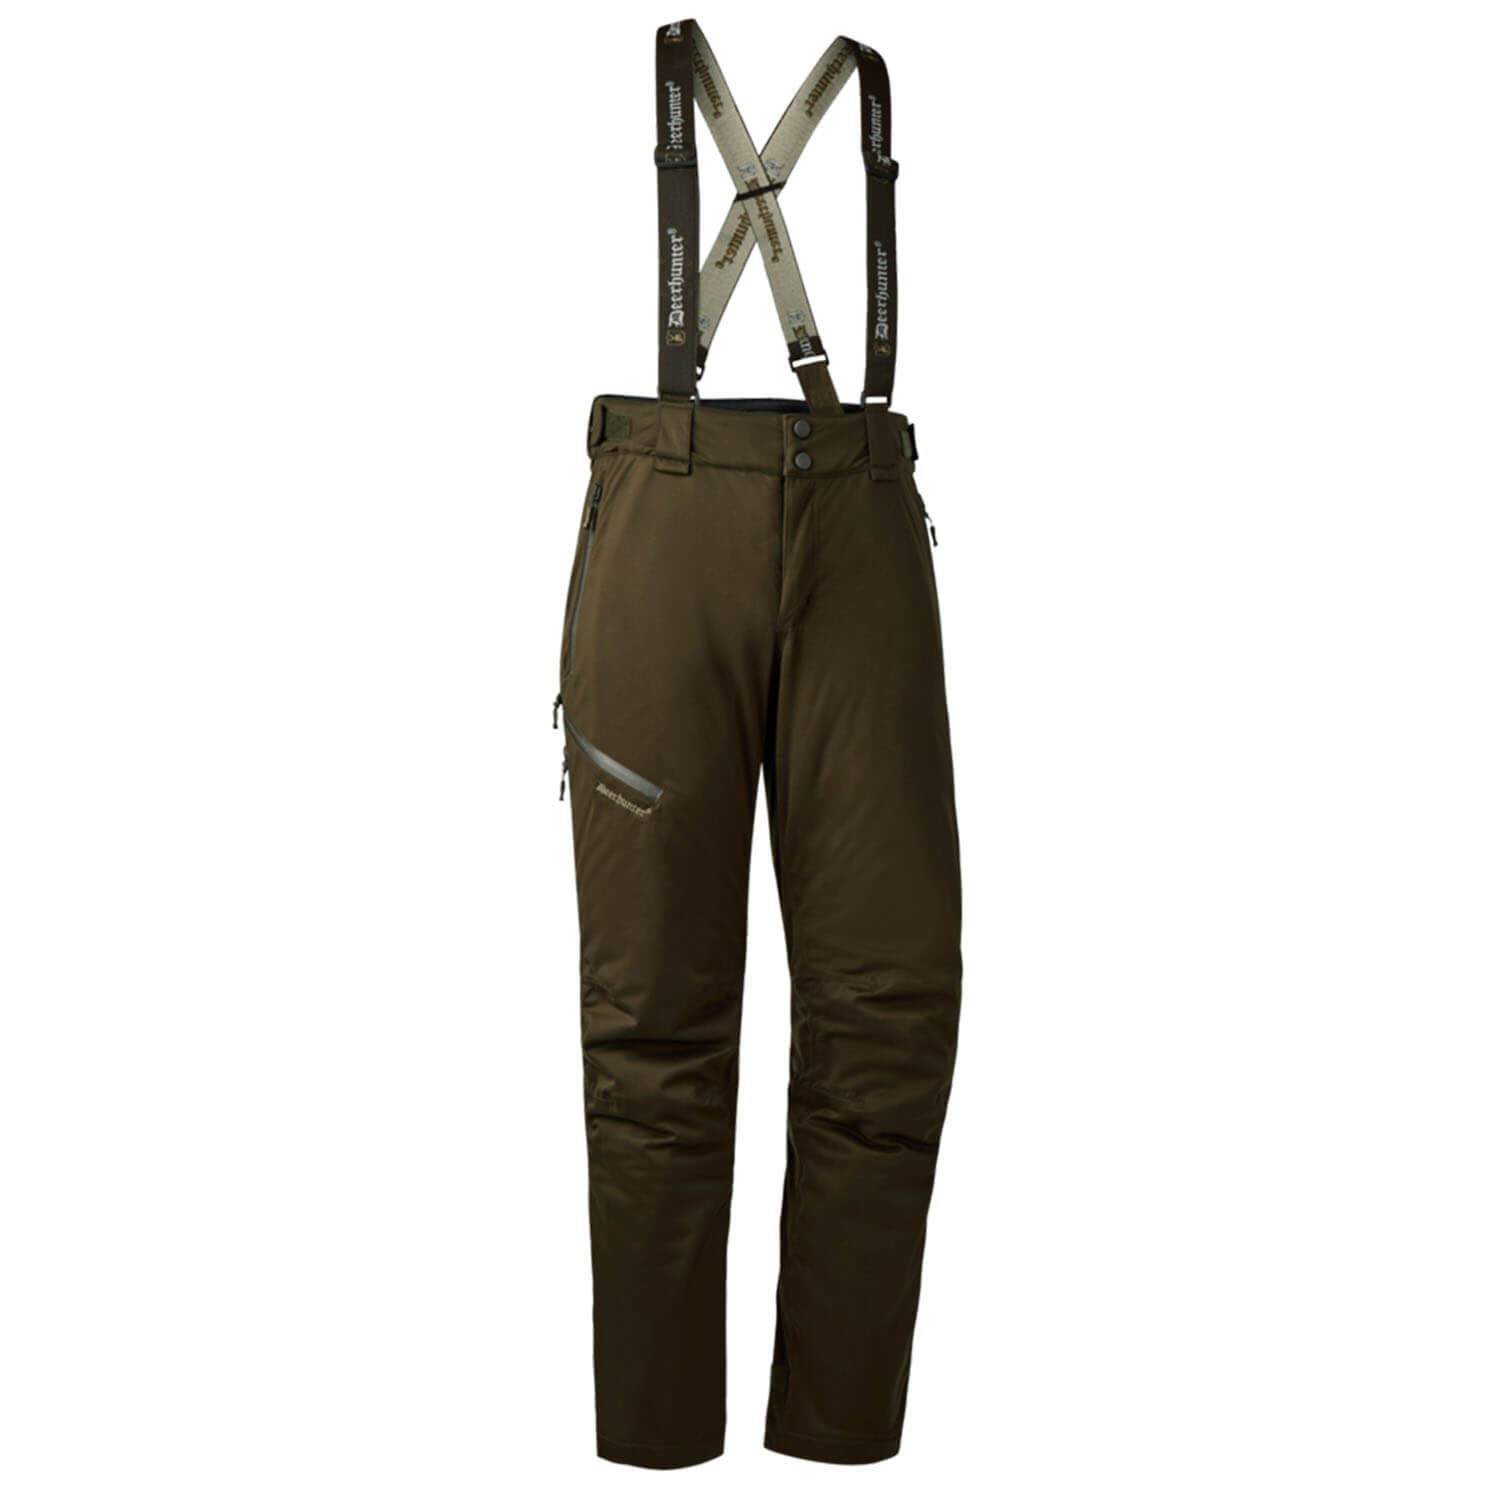 Deerhunter winter trousers Excape (art green) - Winter Hunting Clothing